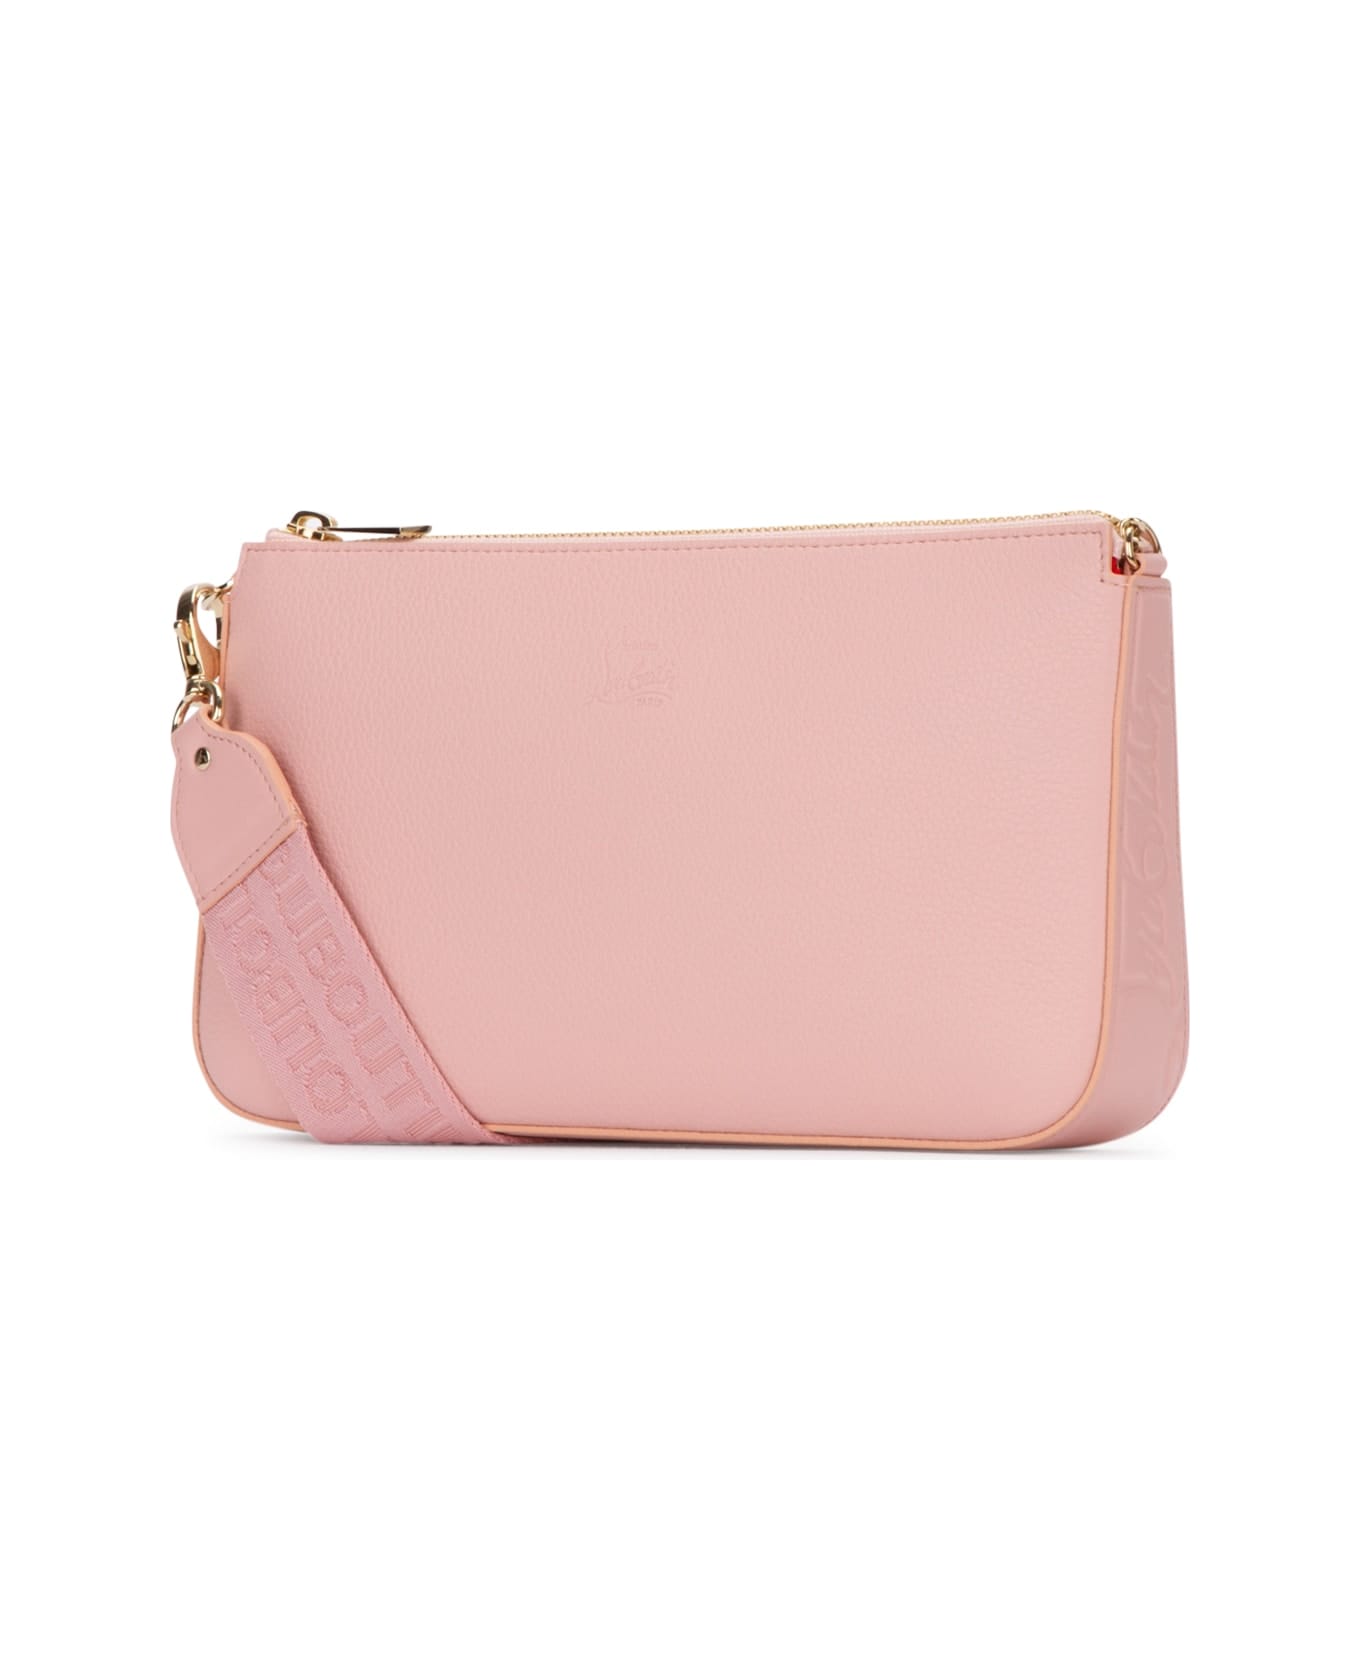 Christian Louboutin Pouch - P712 クラッチバッグ